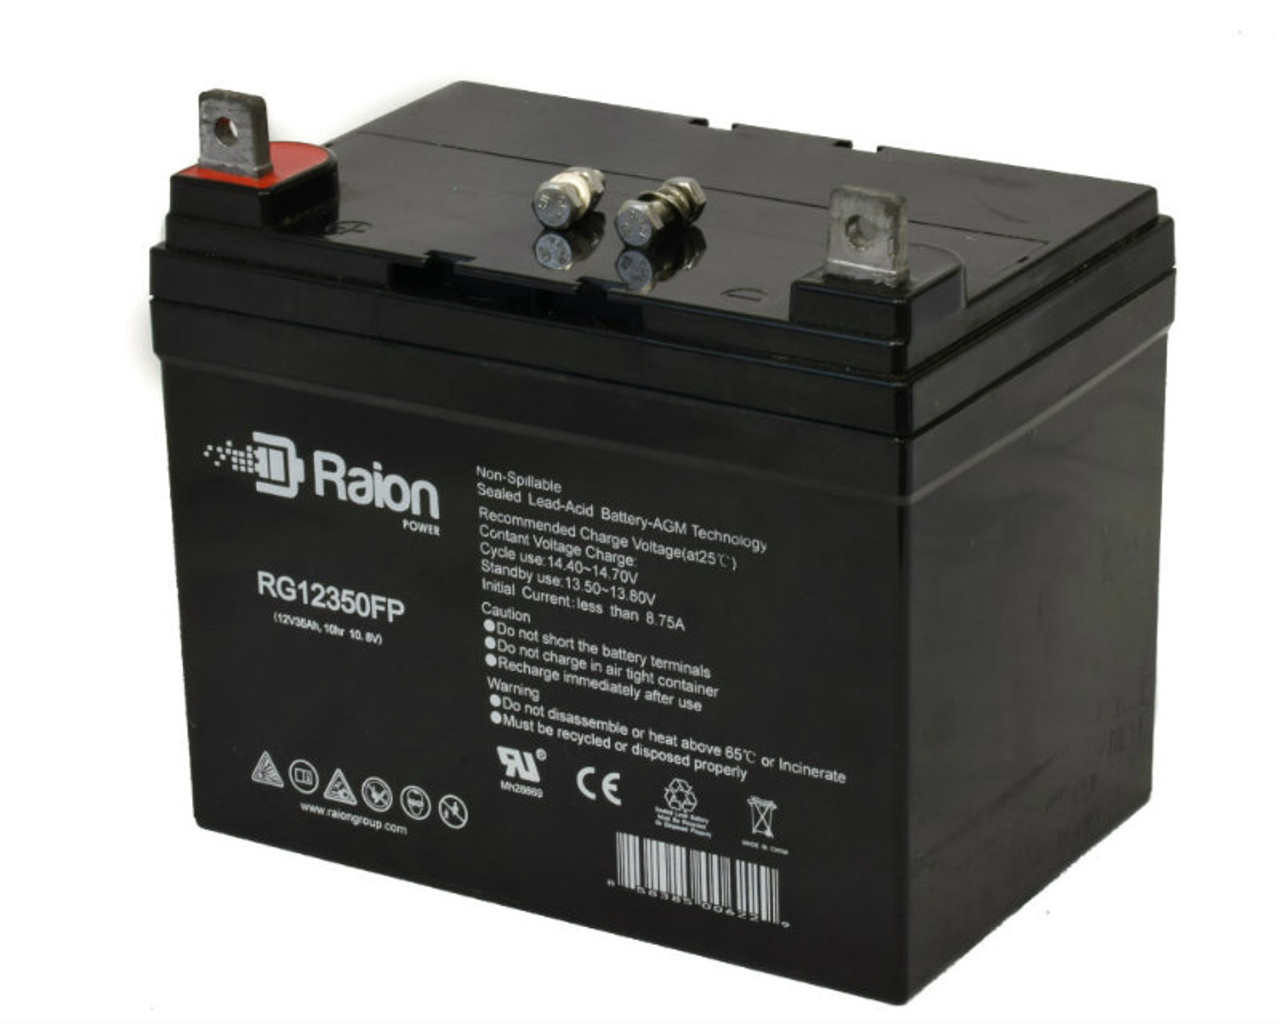 Raion Power Replacement 12V 35Ah RG12350FP Mobility Scooter Battery for Leisure Lift Eclipse